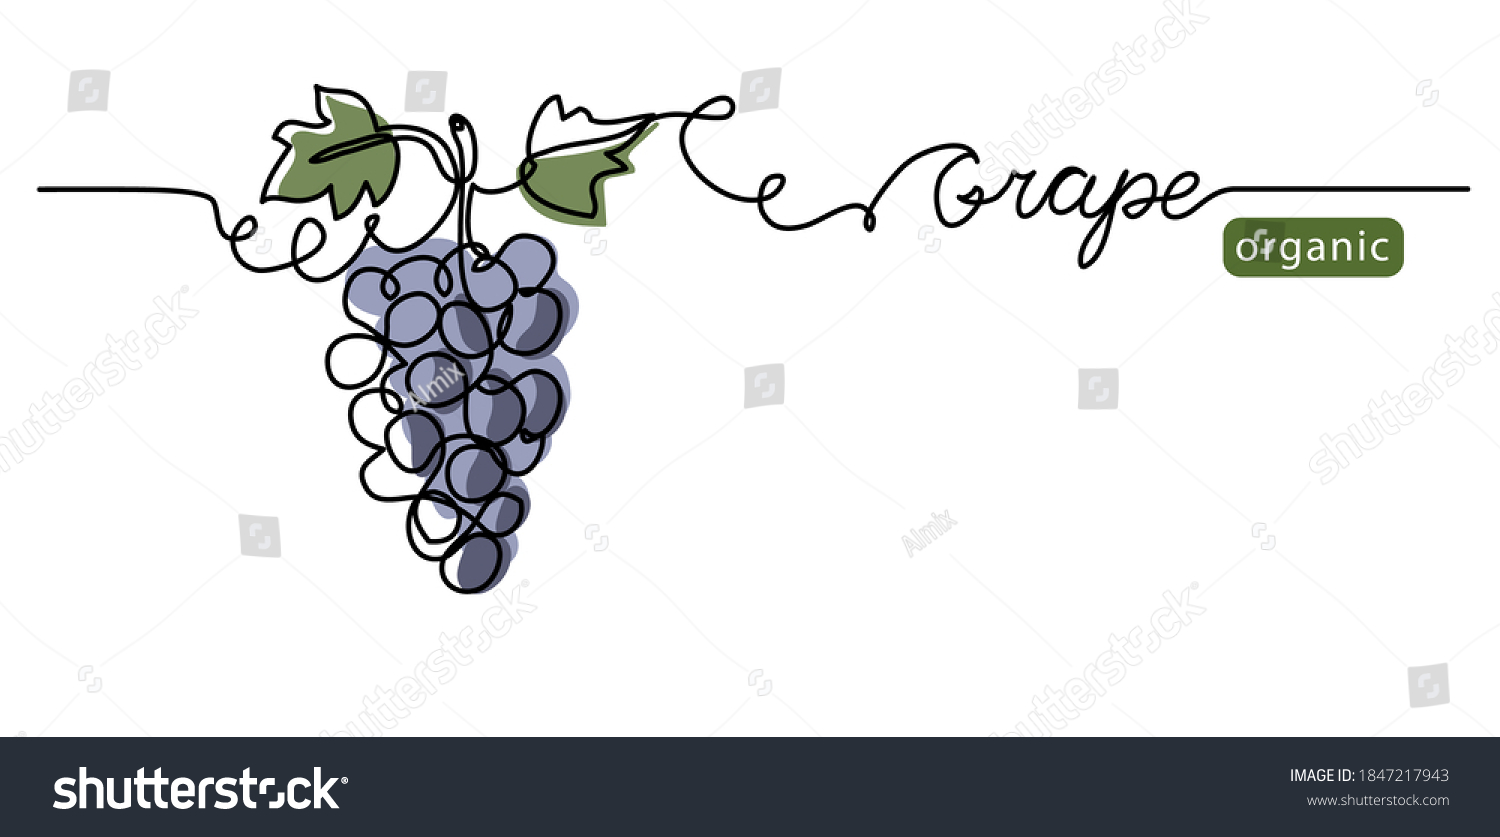 Grape bunch vector illustration. One continuous line drawing art illustration with lettering organic grape. #1847217943